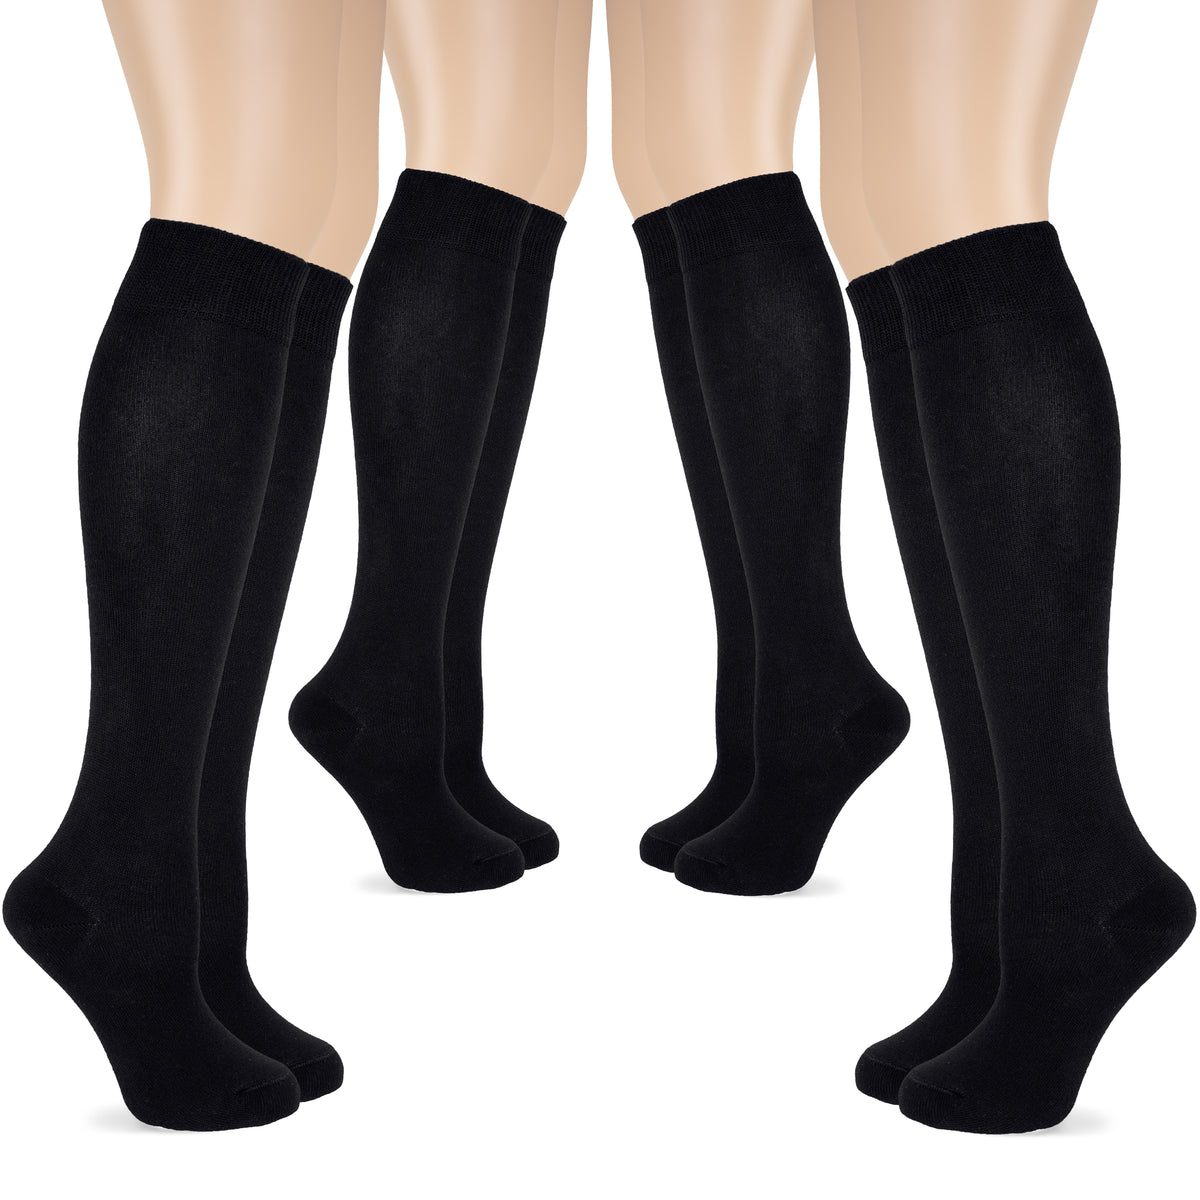 Stay comfortable and stylish with these women's knee-high cotton socks in classic black, sold in a set of four.